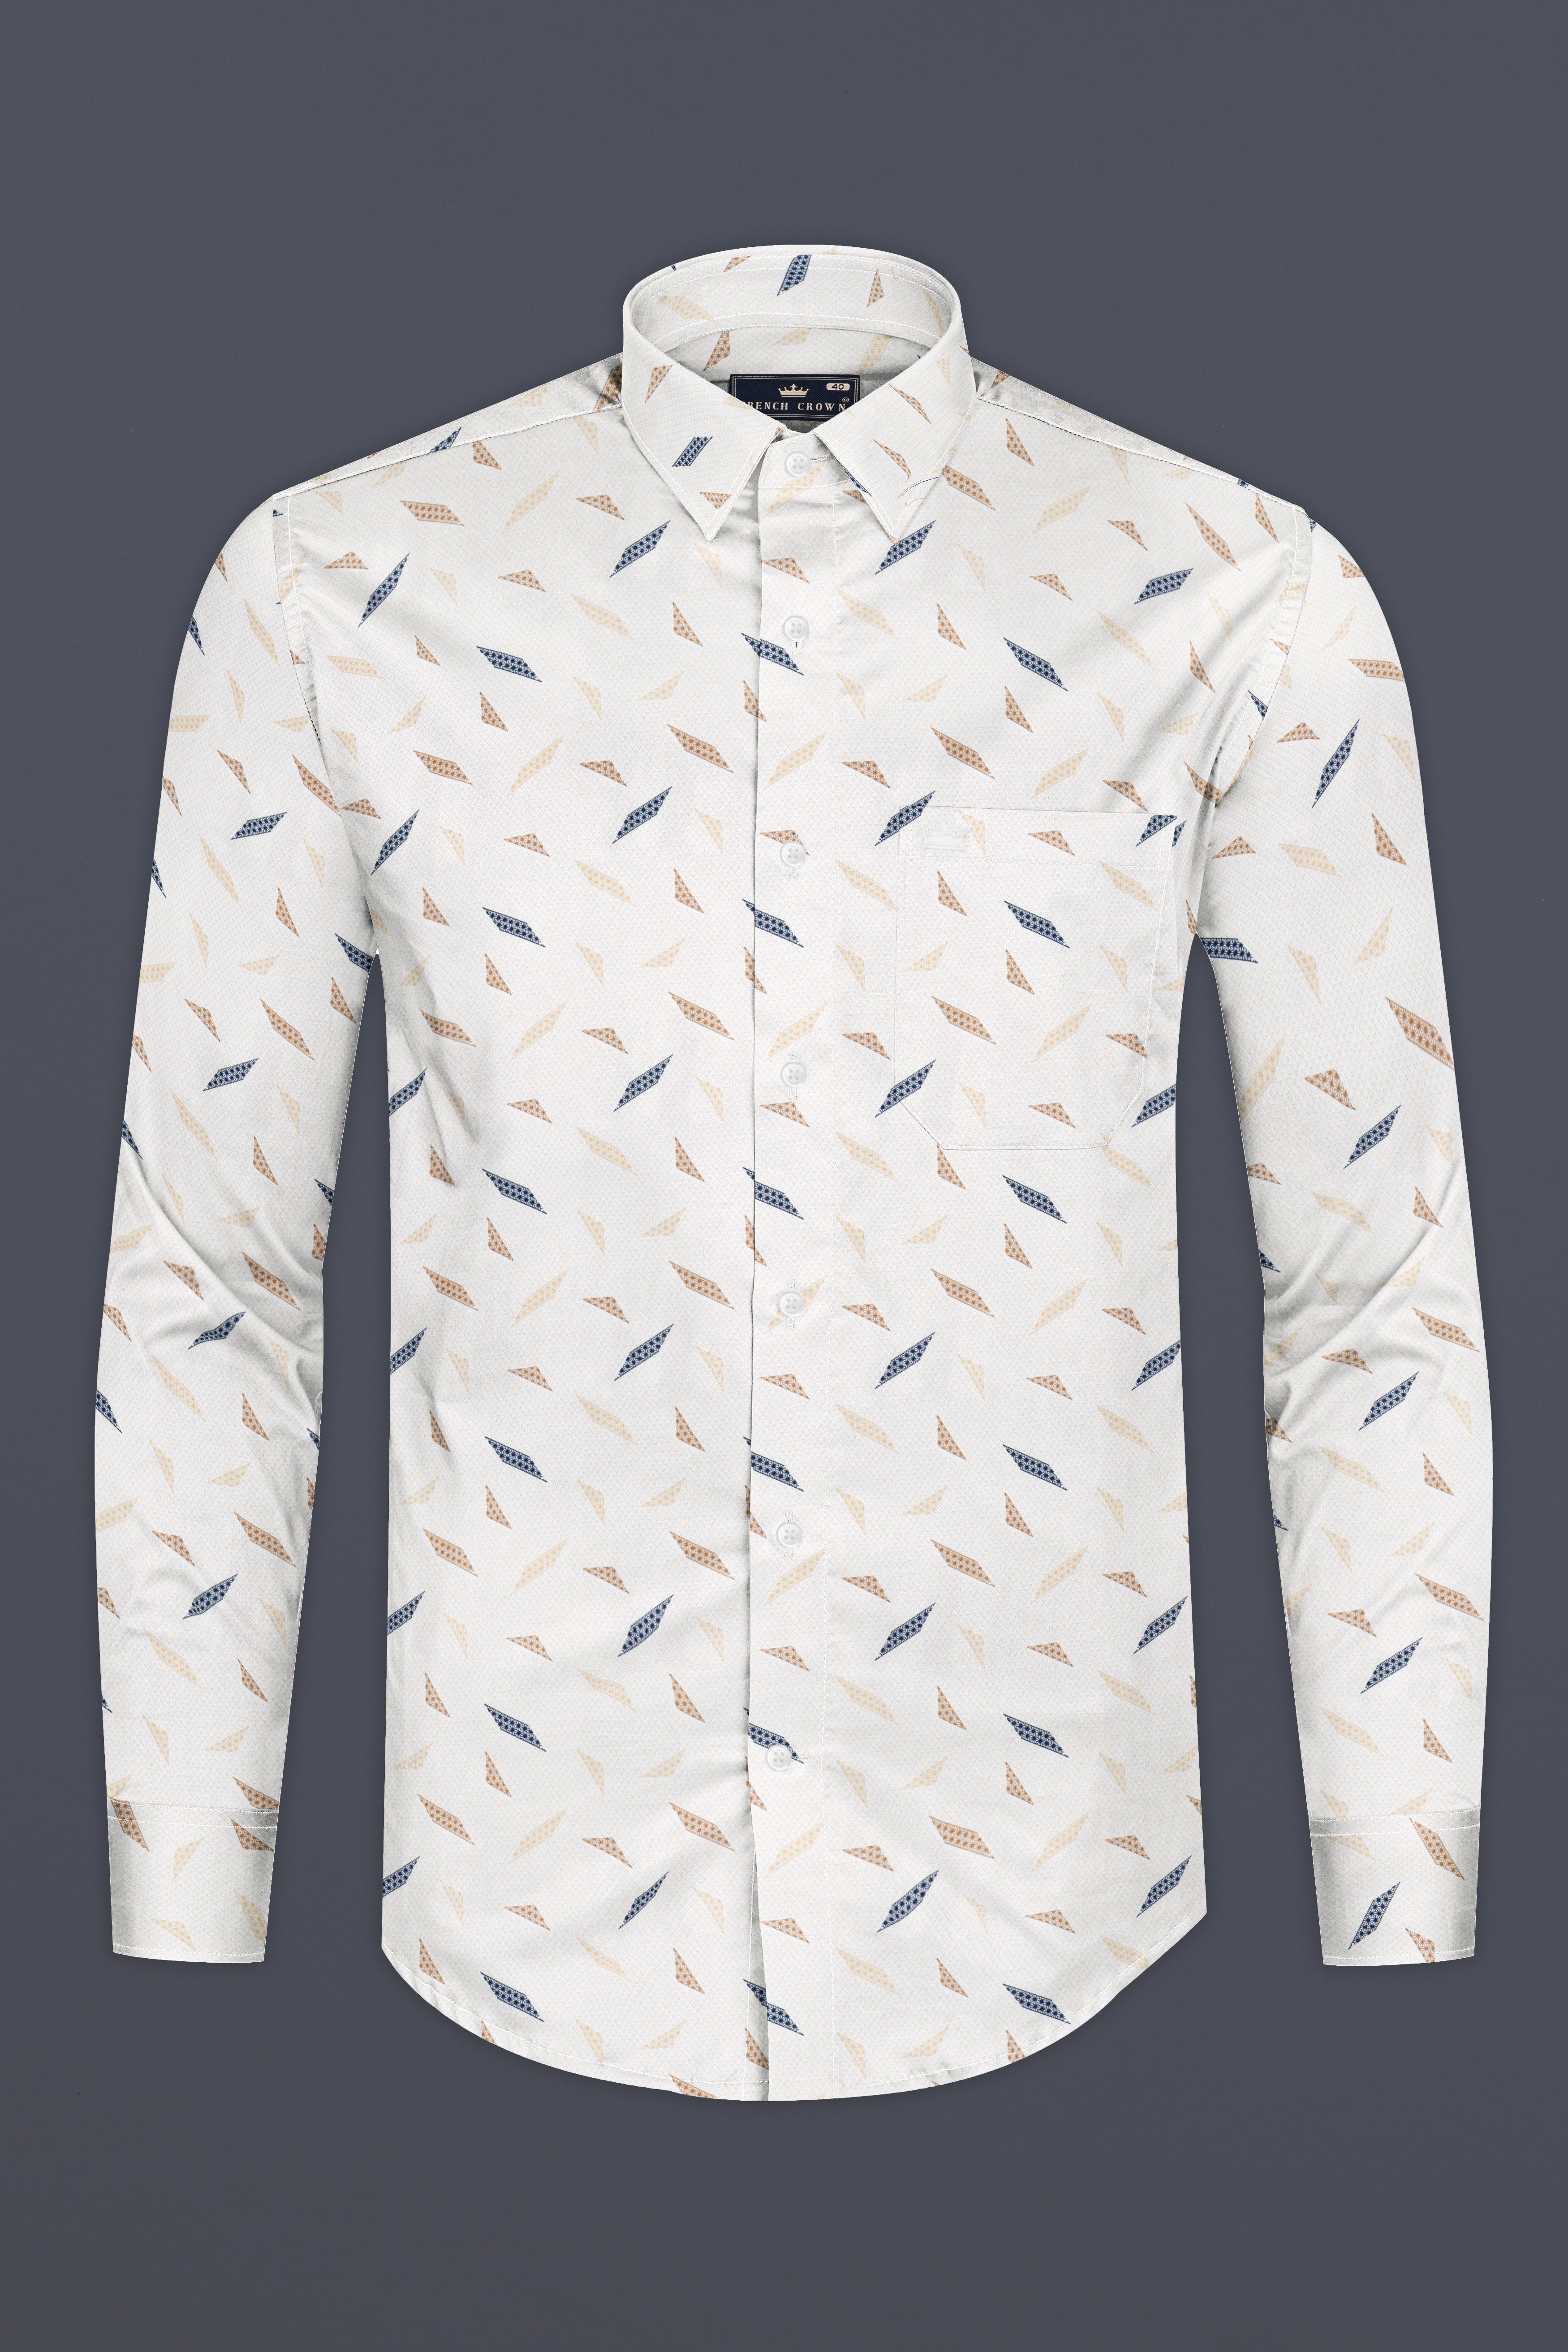 Bright White with brown and blue printed Dobby Textured Premium Giza Cotton Shirt